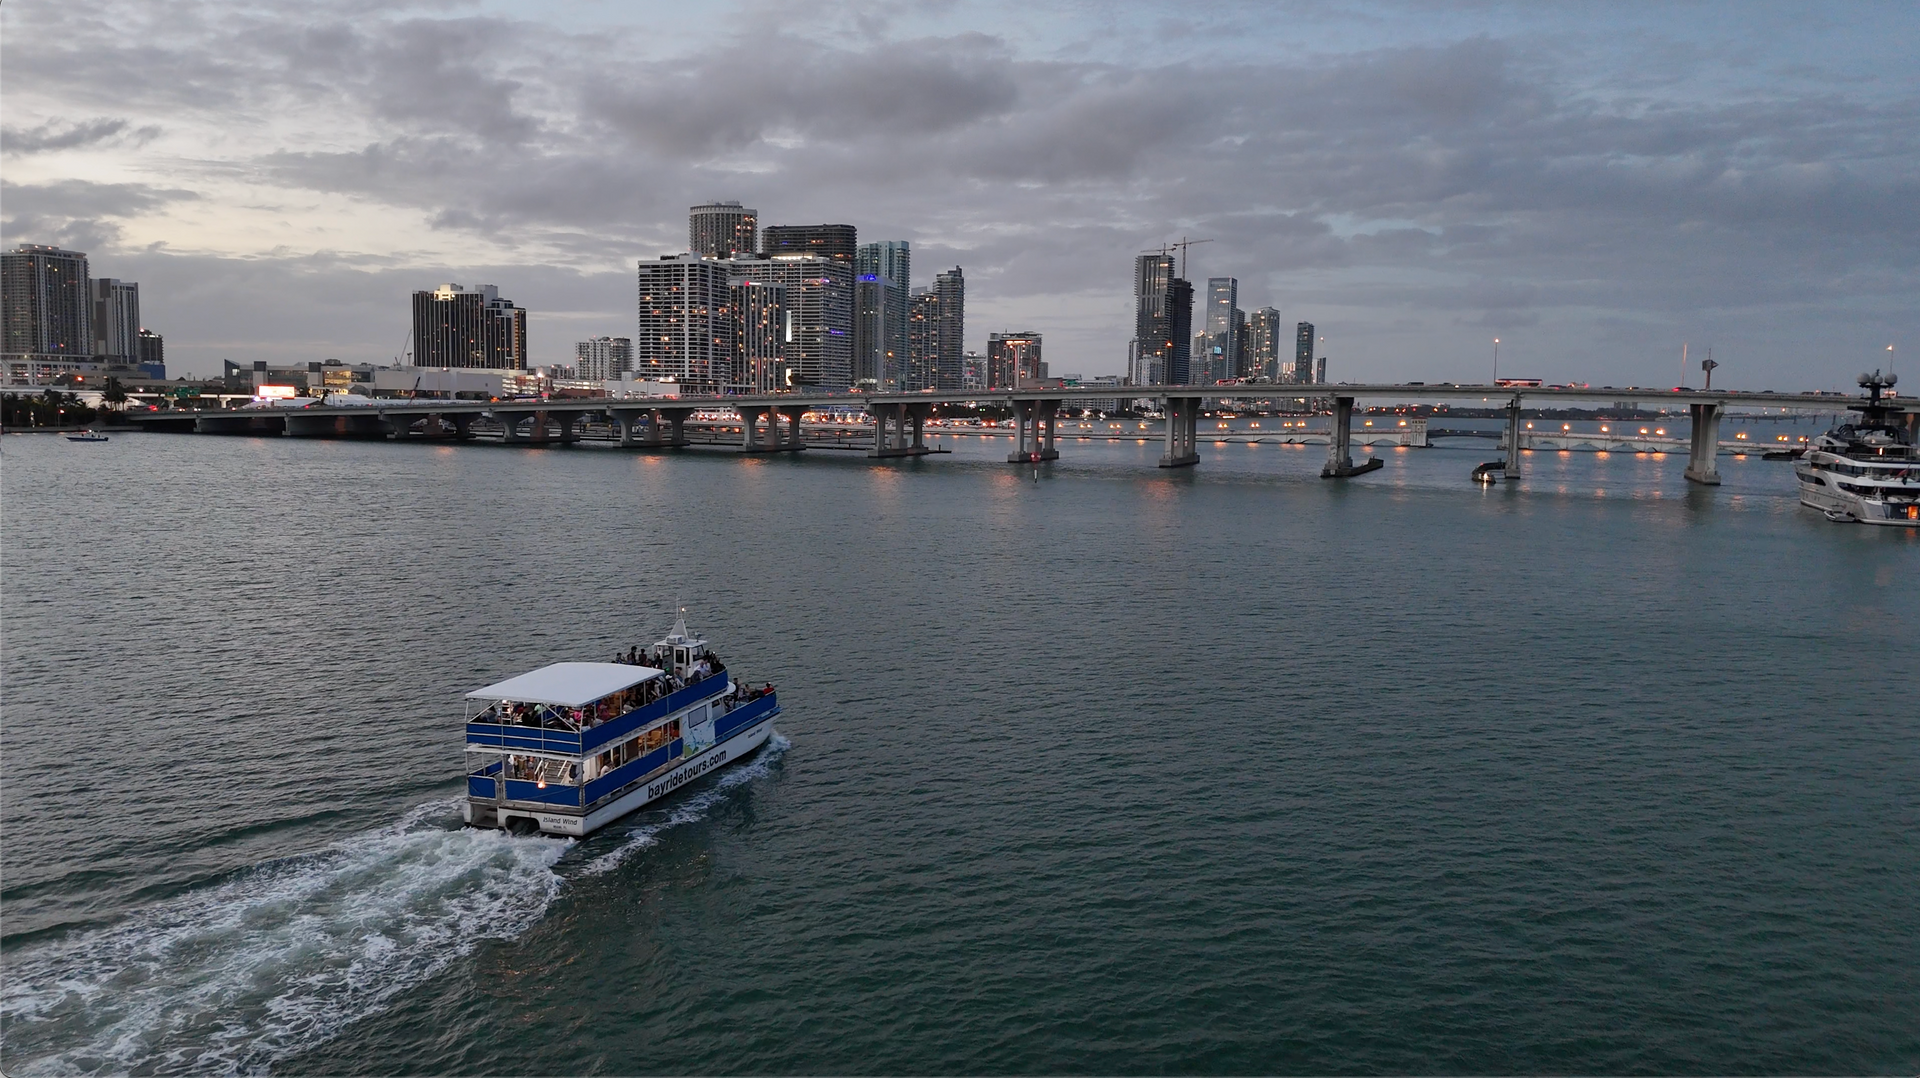 But it's the amazing views from the bay that truly do the talking, with spectacular shots of Miami Beach, Brickell Key, Star Island, mansions, yachts, cruise ships, and downtown skyline. Come take a cruise at dusk and see Miami from the bay. The Miami sunset cruise brings out the ❤ side in people. 